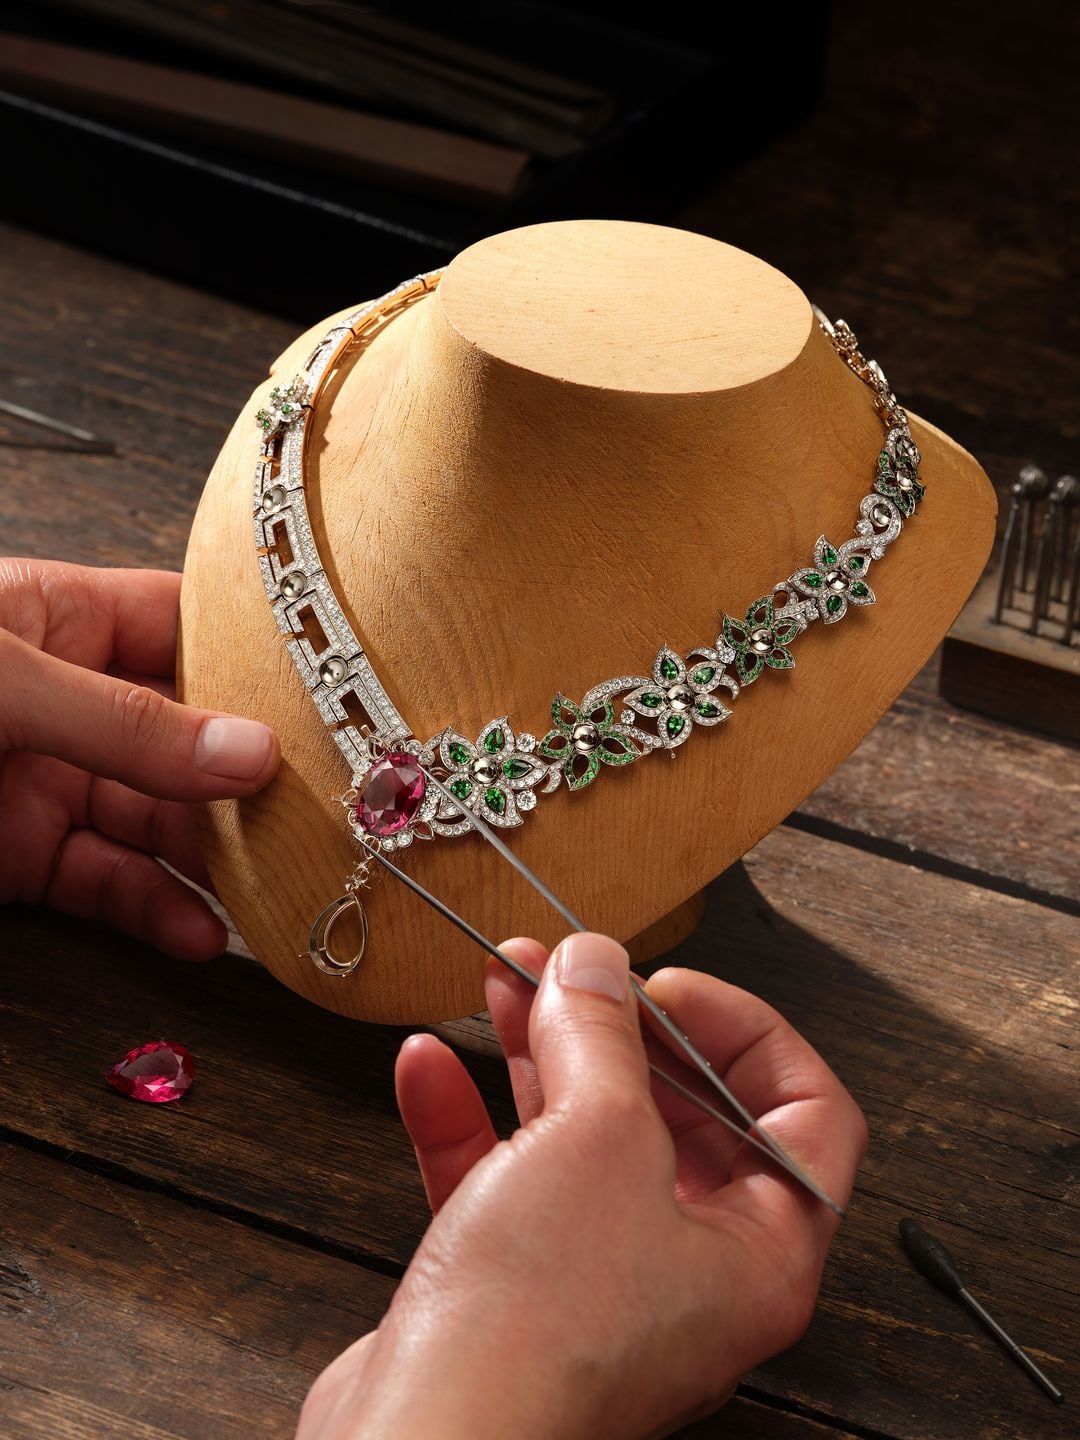 A jeweller adds the finishing touches to a necklace which features pink and green gemstones